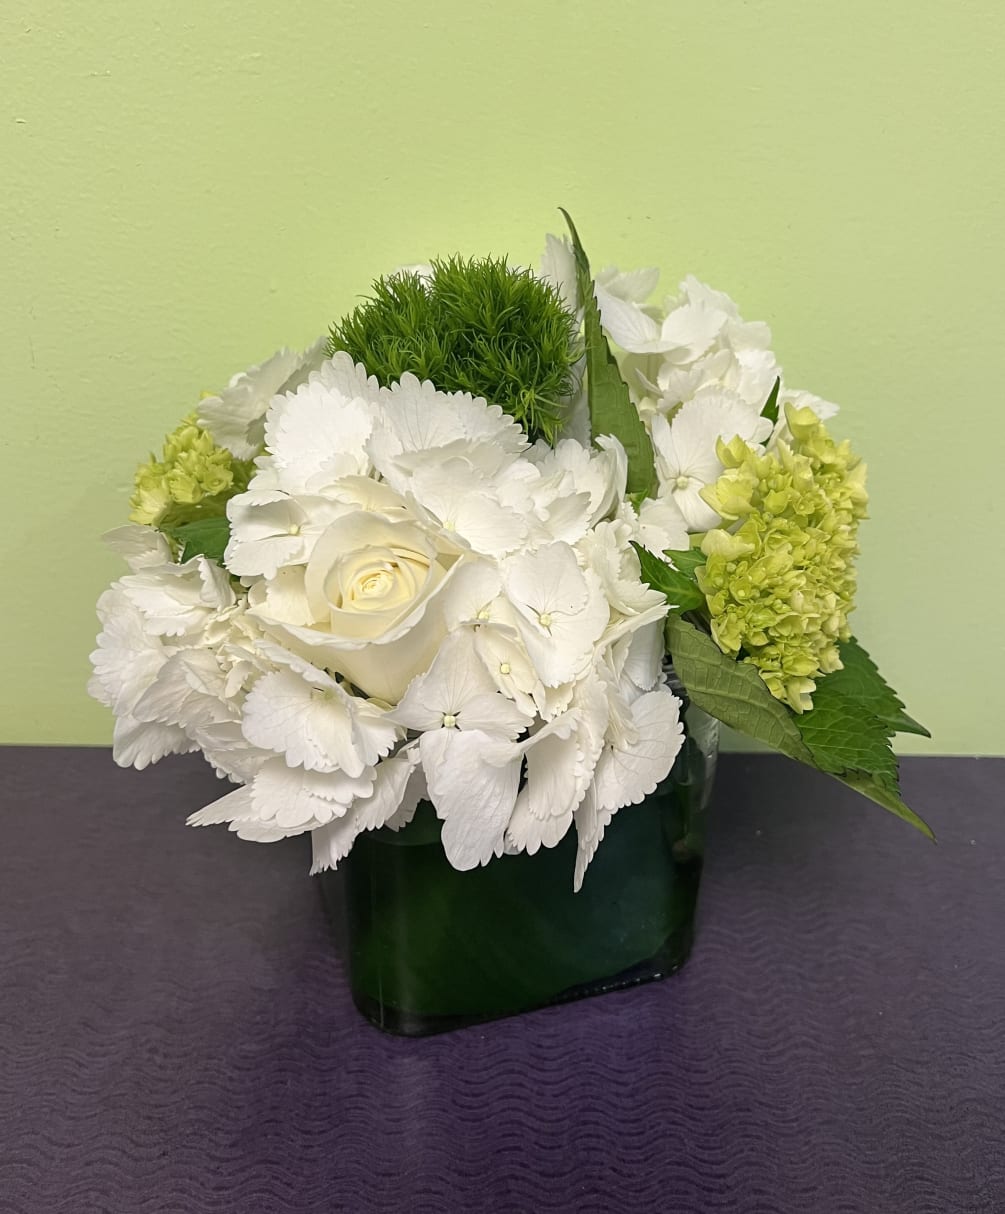 This arrangement can be used for all occasions. It has white Hydrangeas